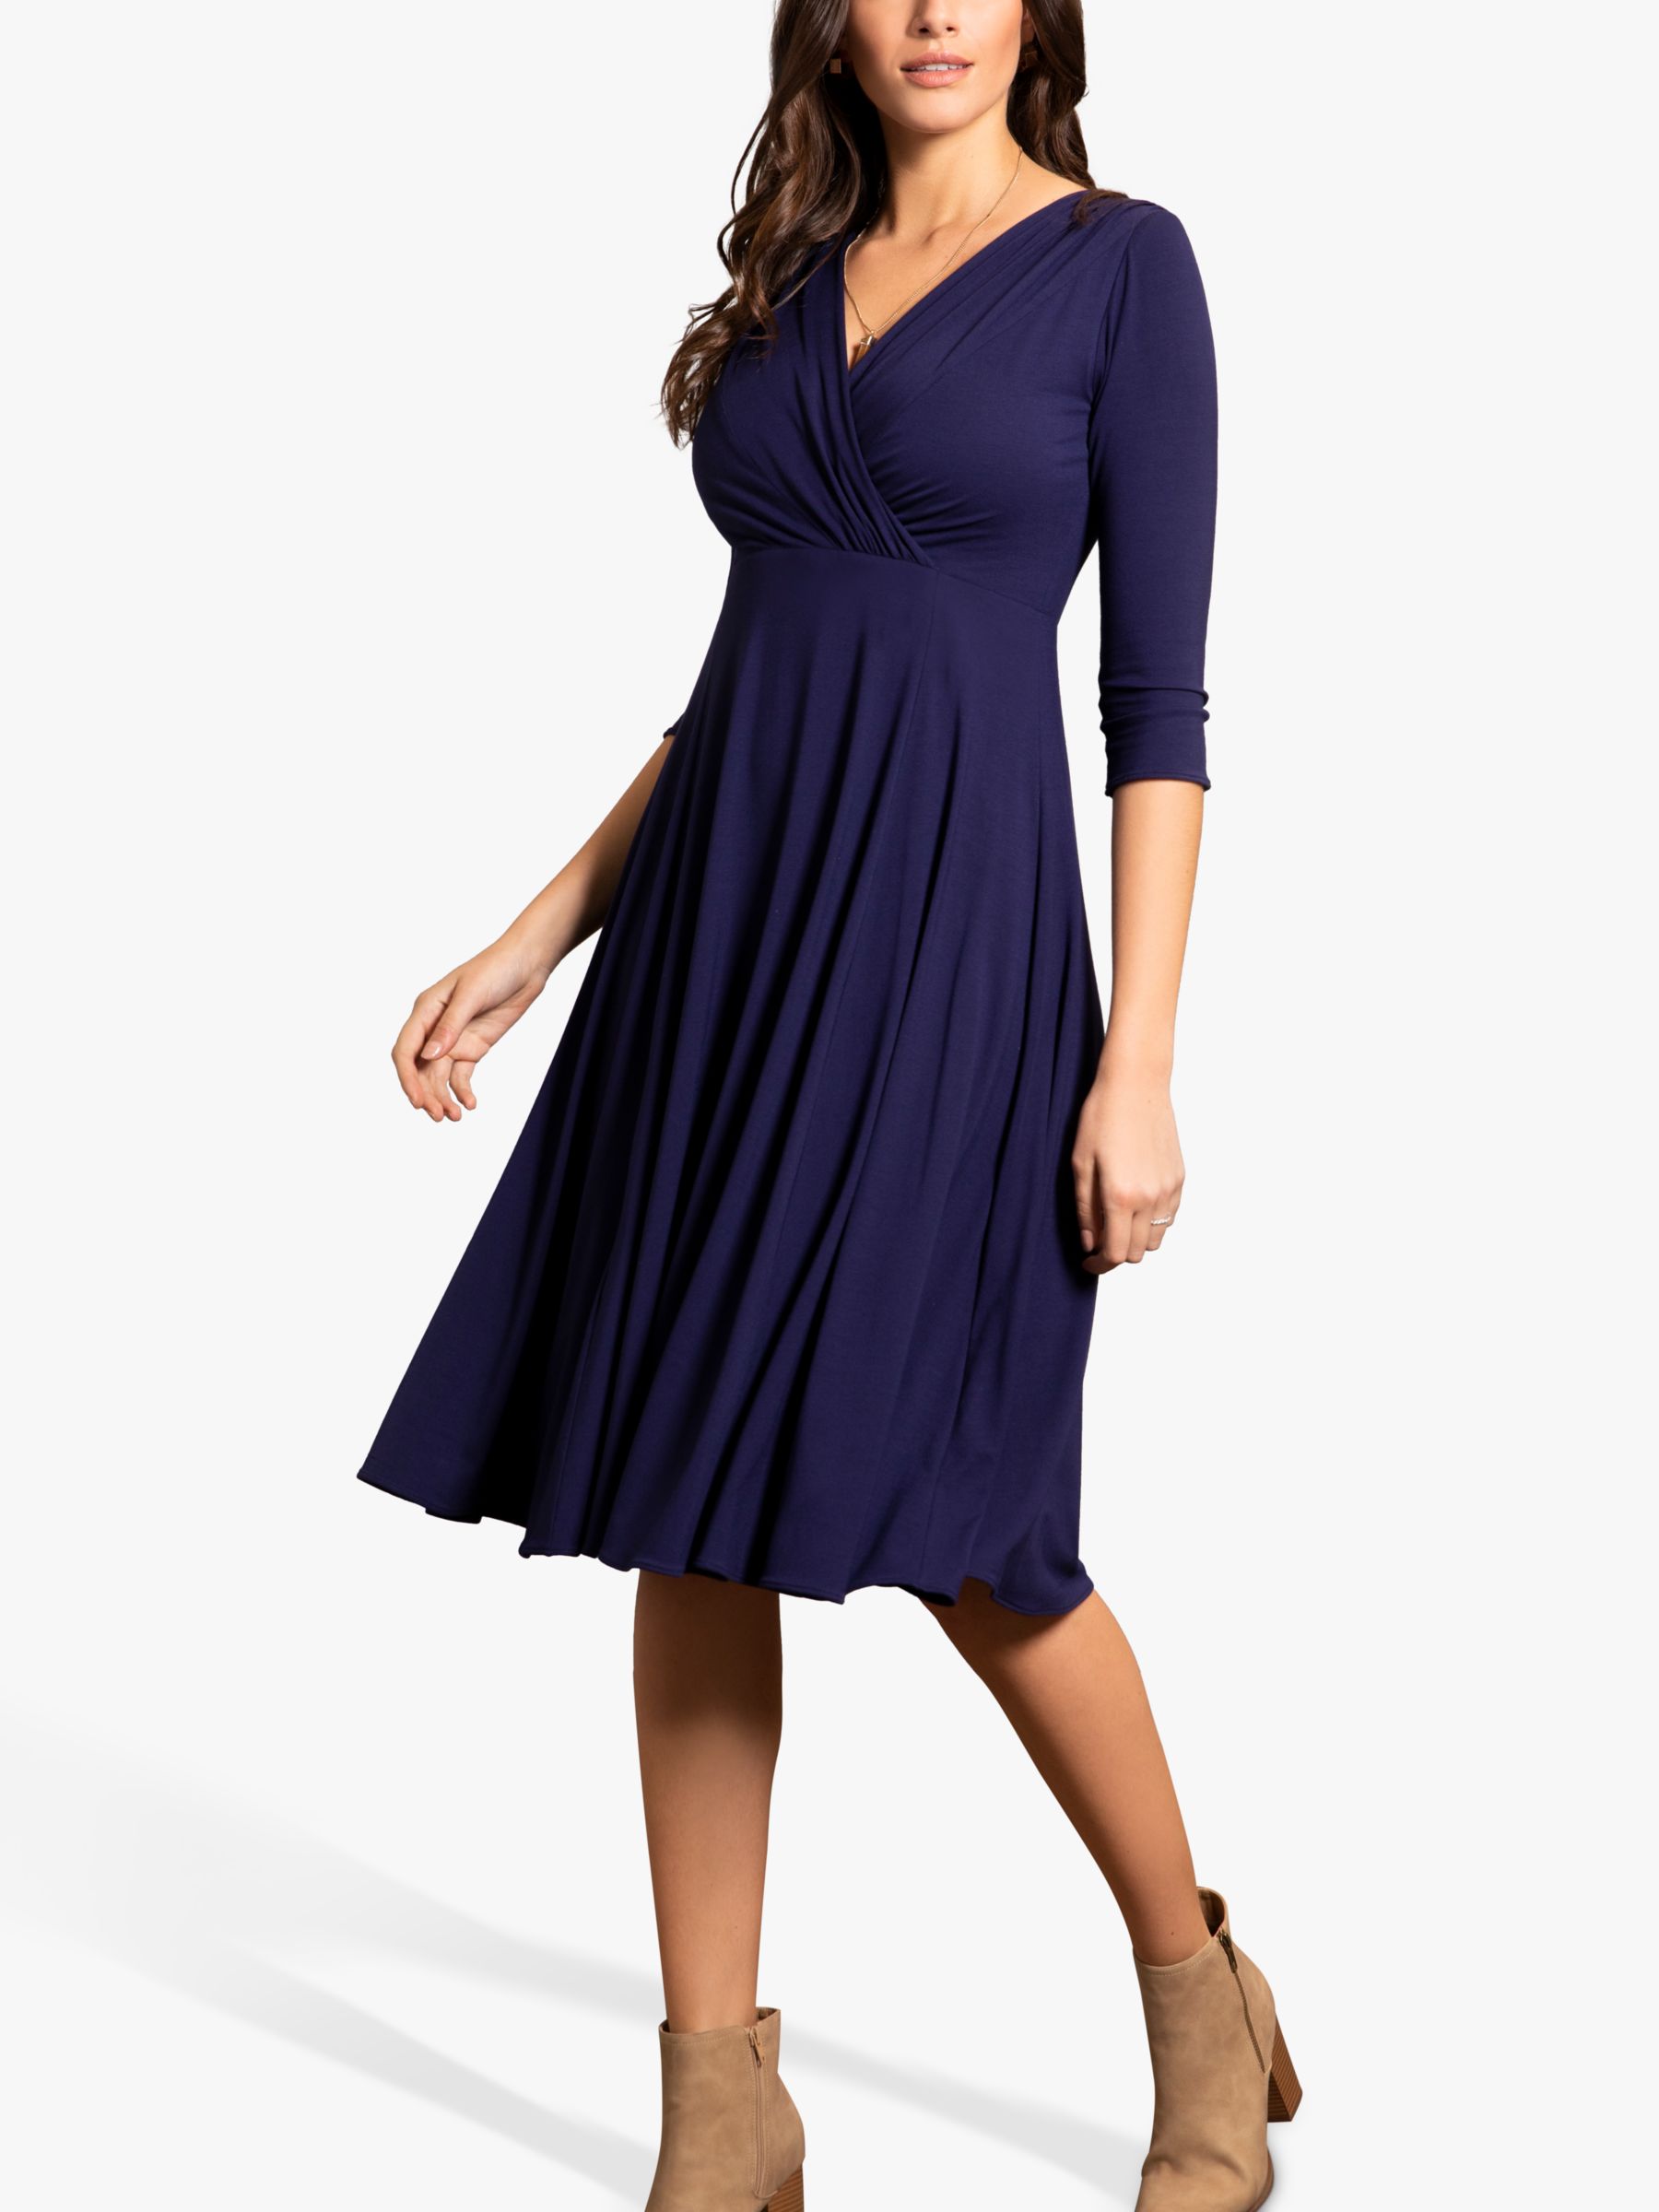 The Hunt: The Best Fit and Flare Work Dresses 